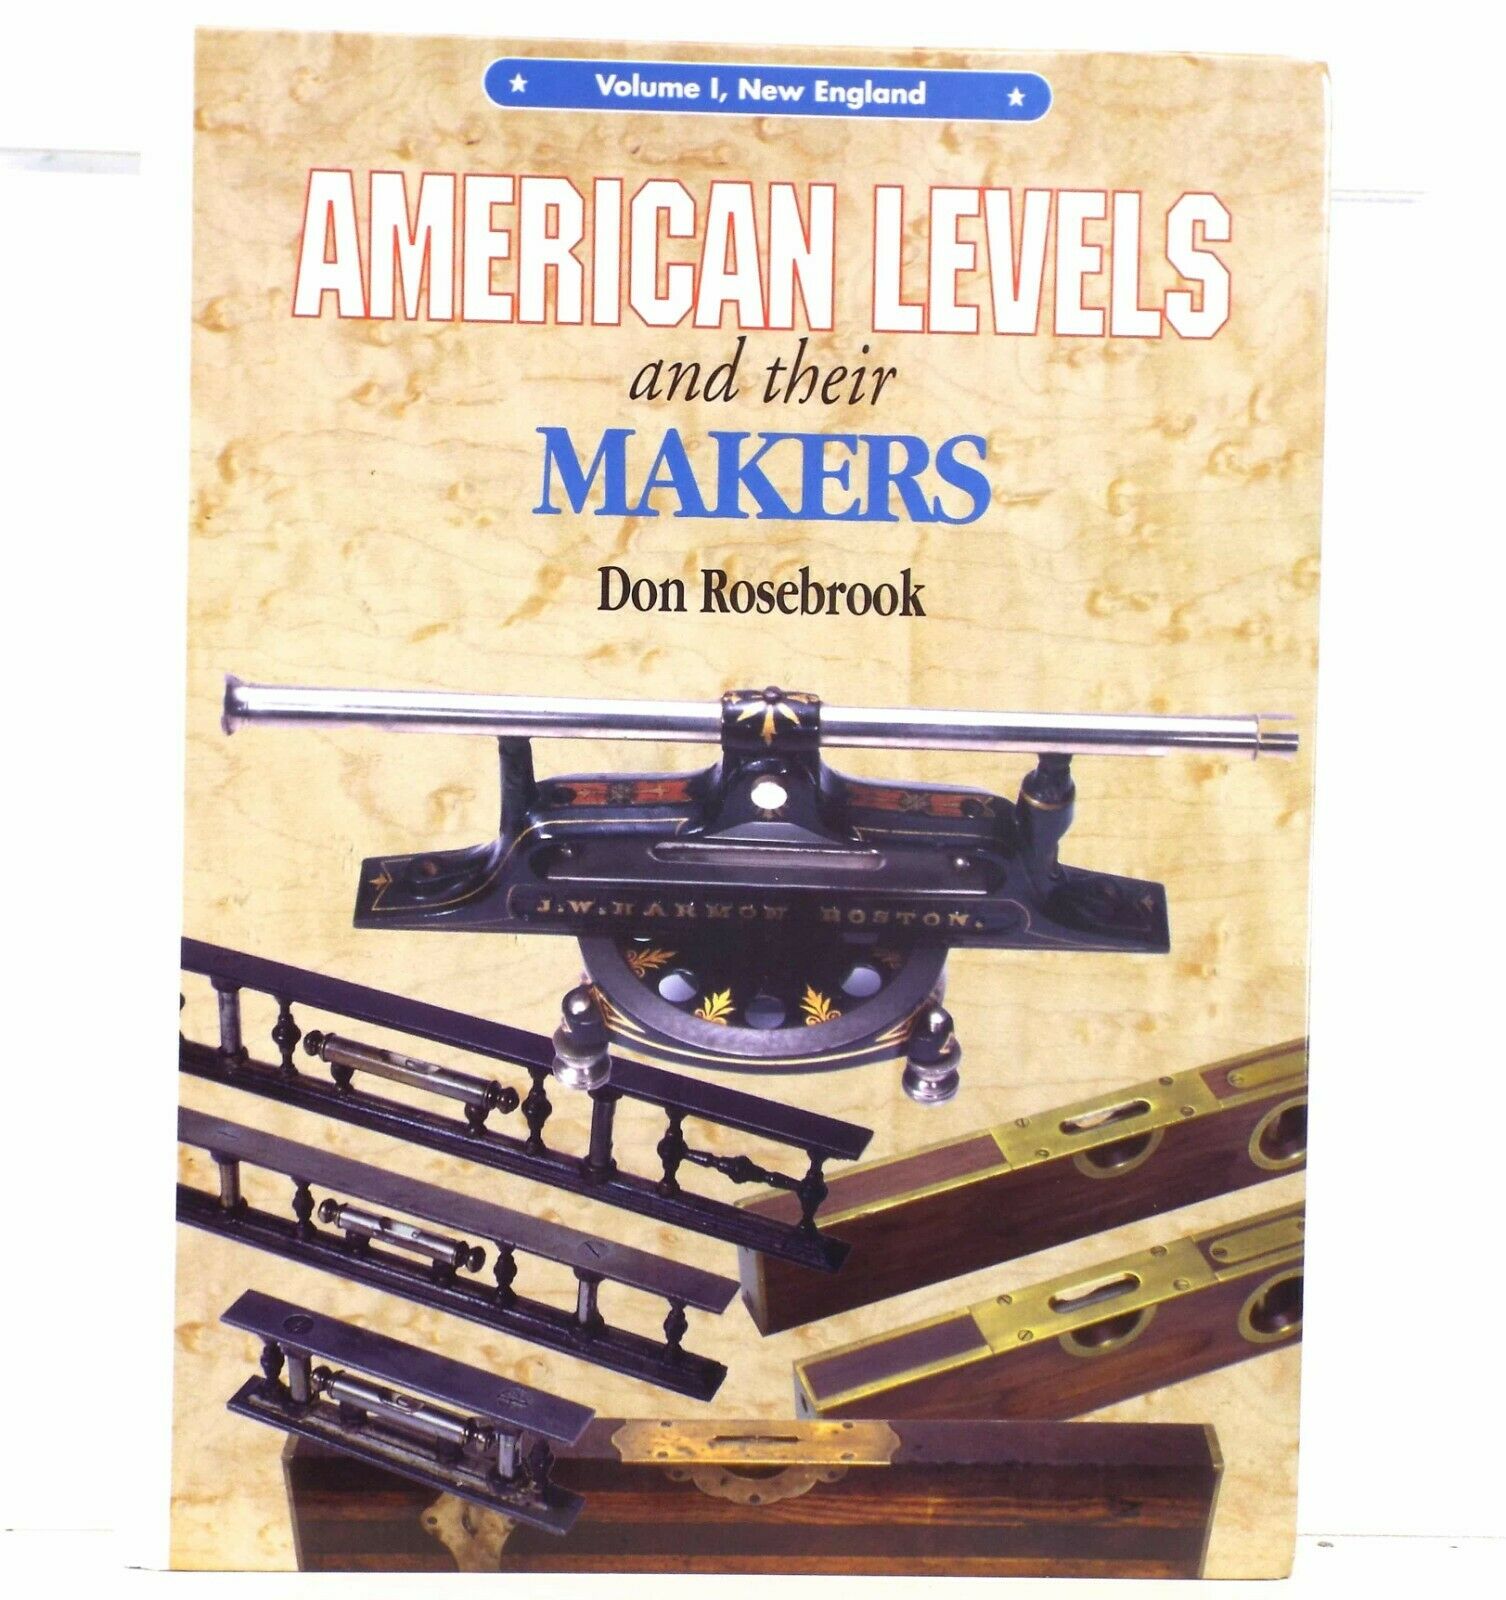 American Levels And Their Makers, New England, Don Rosebrook, 1999, 267 Pages